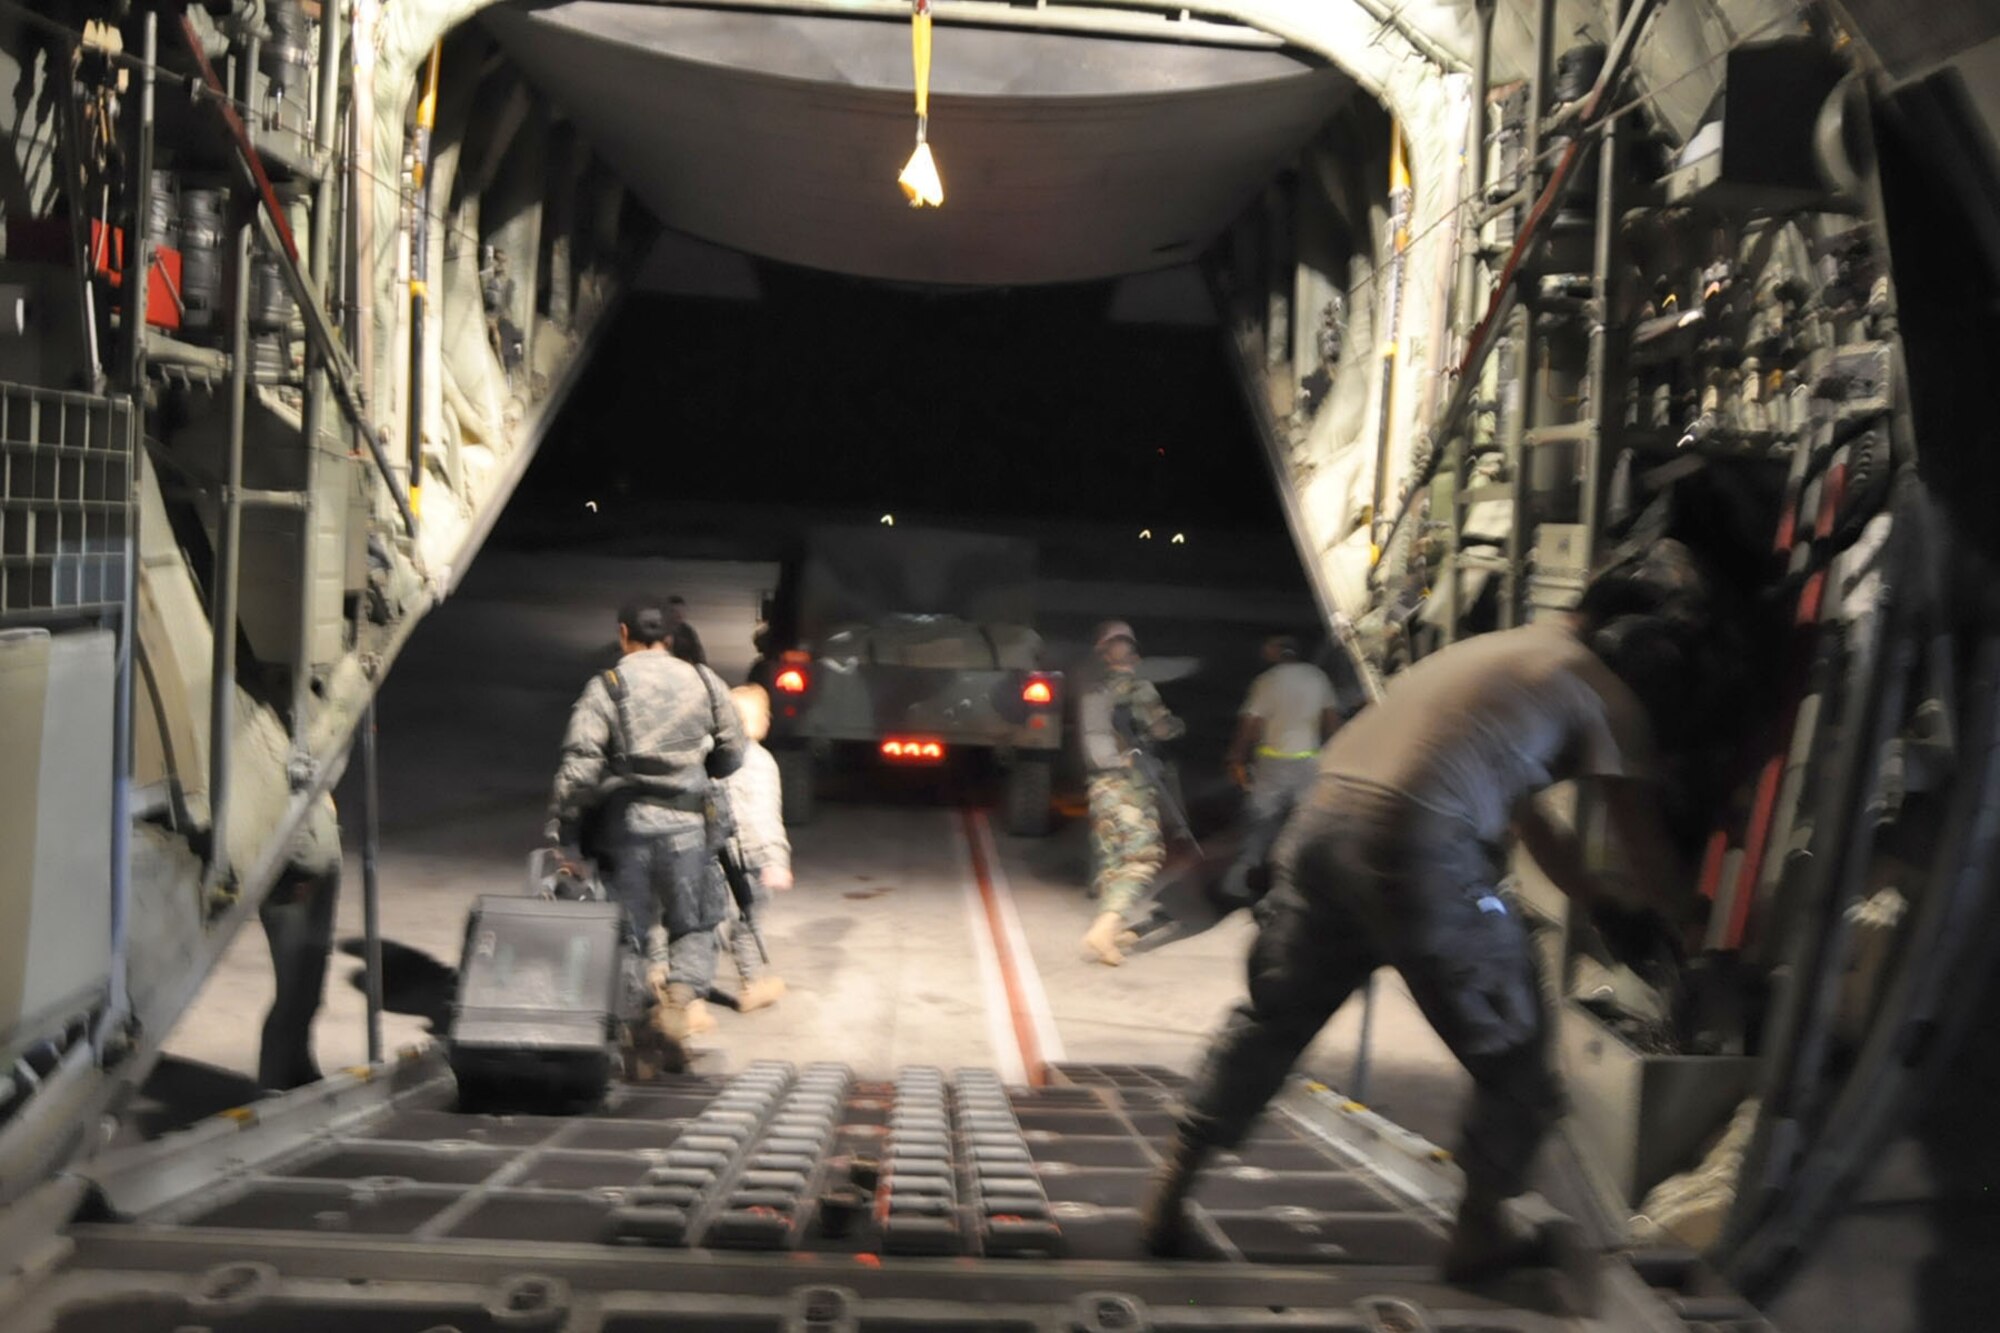 PORT-AU-PRINCE INTERNATIONAL AIRPORT, Haiti -- The last member of a group of 19 U.S. Military medical personnel walks down the rear cargo ramp of a C-130H Hercules tactical cargo transport aircraft, assigned to Air Force Reserve Command's 910th Airlift Wing, on the tarmac here, January 18.  The medical personnel, consisting of U.S. Army and Air Force Servicemembers were flown, by the 910th's C-130, to Haiti from Soto Cano Air Base, Honduras. The 910th, based at Youngstown Air Reserve Station, Ohio, has three aircraft and crews supporting the relief effort in the aftermath of a major earthquake that devastated Port-au-Prince and the surrounding areas. Currently more than 30 personnel from the 910th are flying relief effort missions with a myriad of Citizen Airmen working at YARS to provide home station support to the crews. The 910th Airlift Wing stands ready to provide airlift capabilities to the massive humanitarian effort as long as needed by mission requirements.
